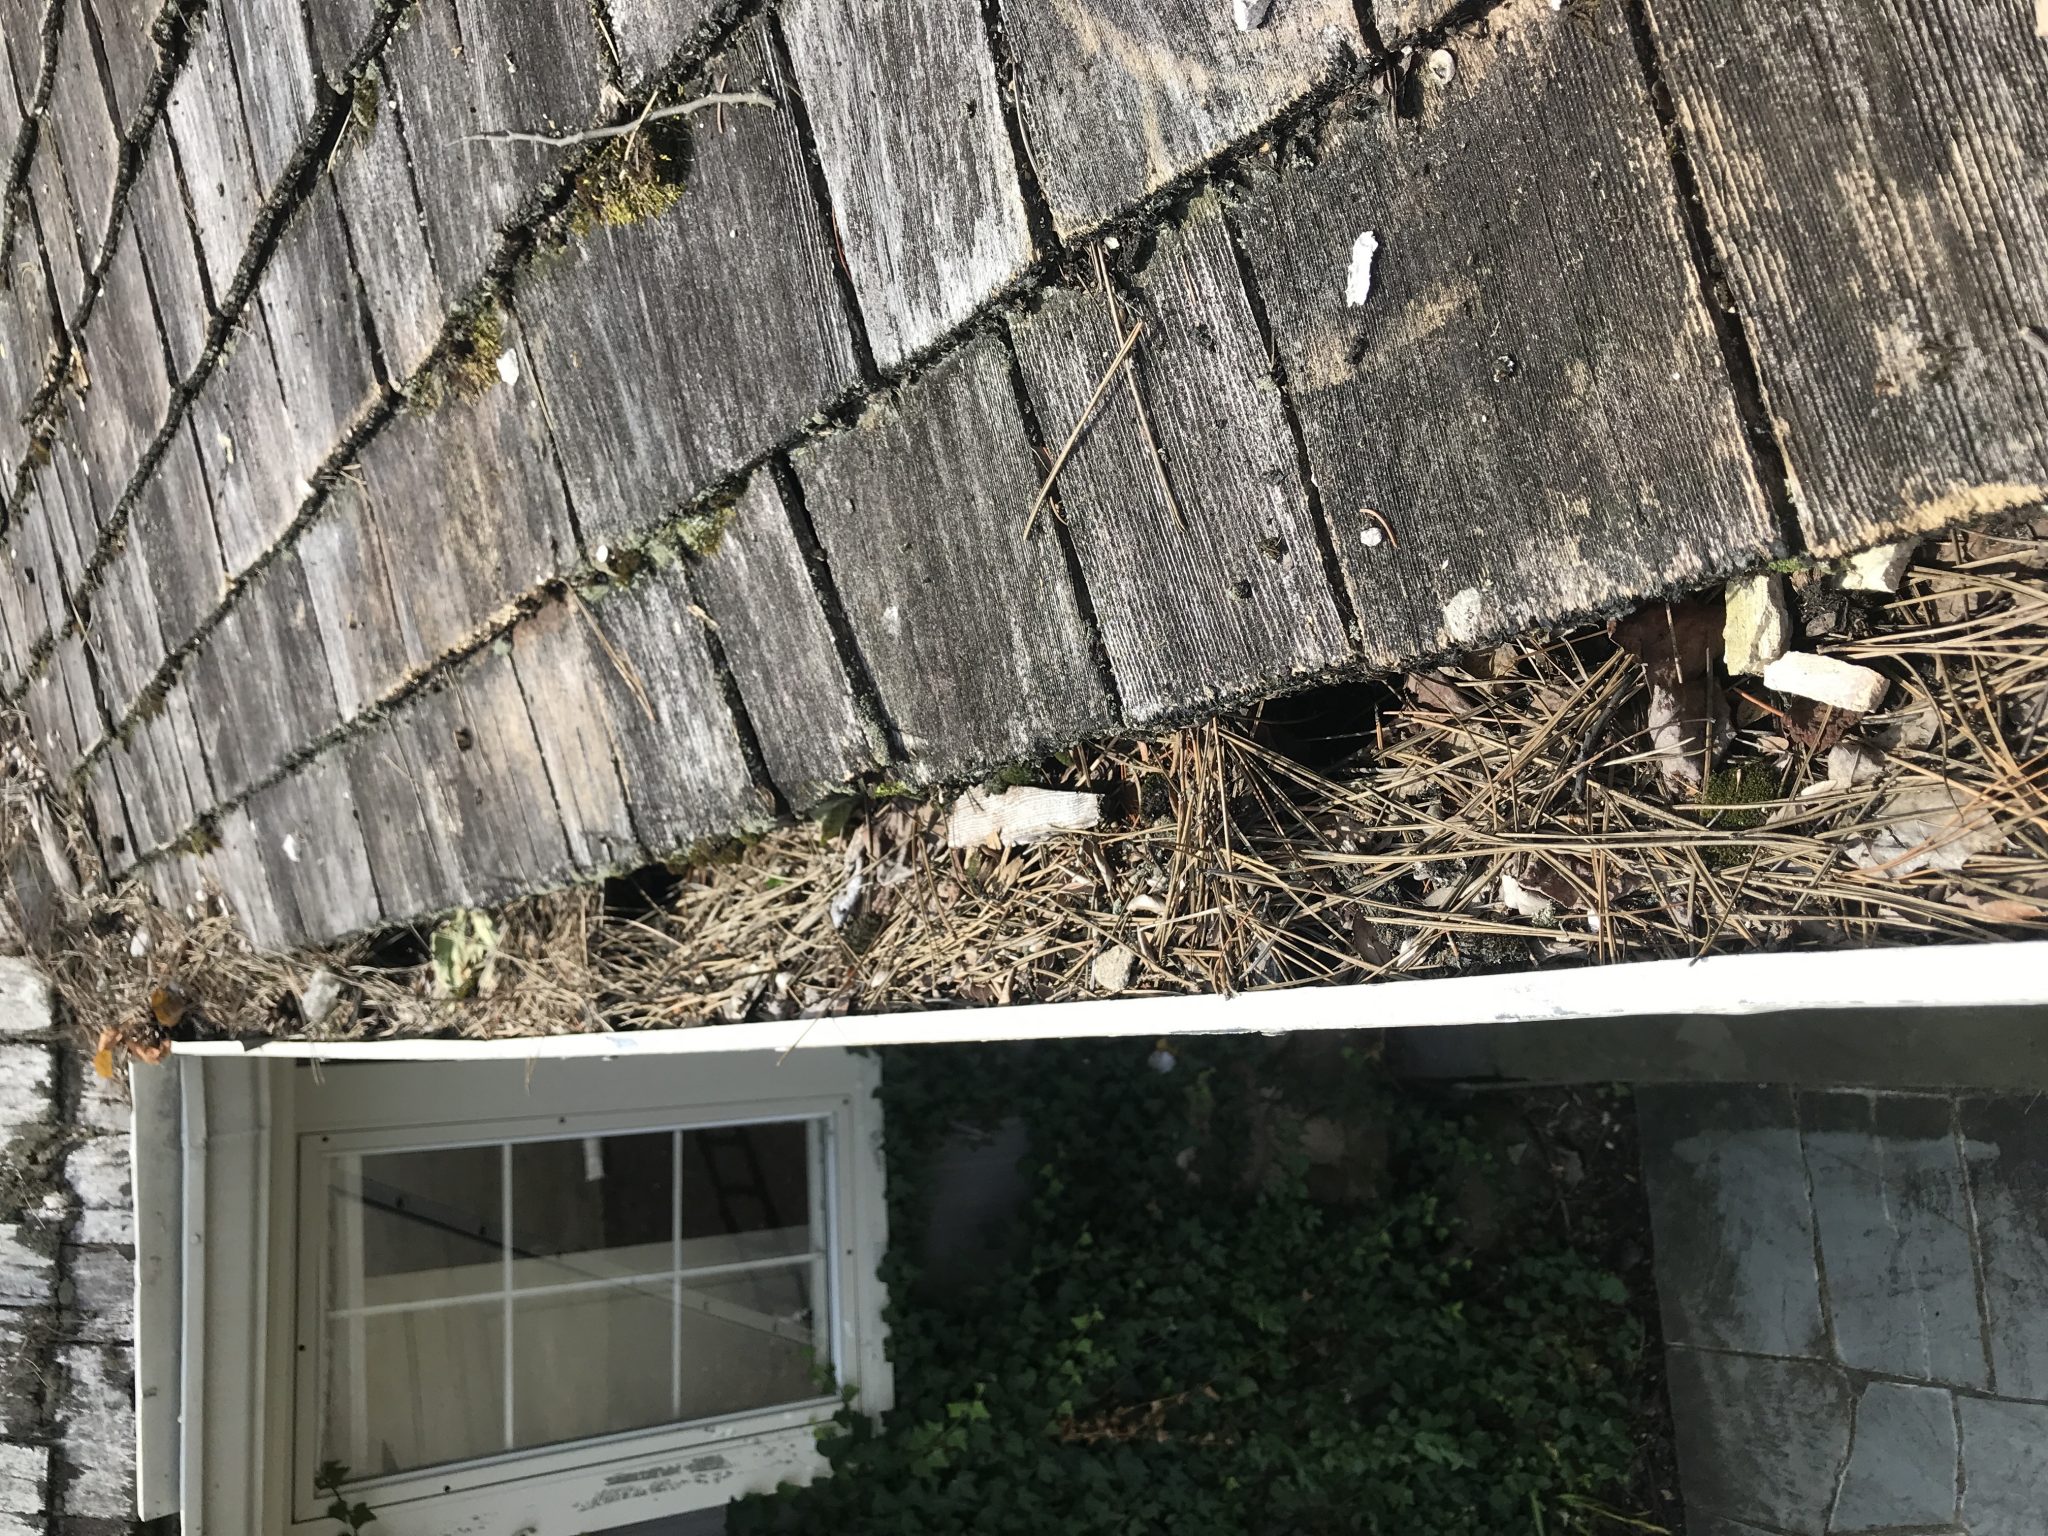 Gutter Cleaning in Chicago